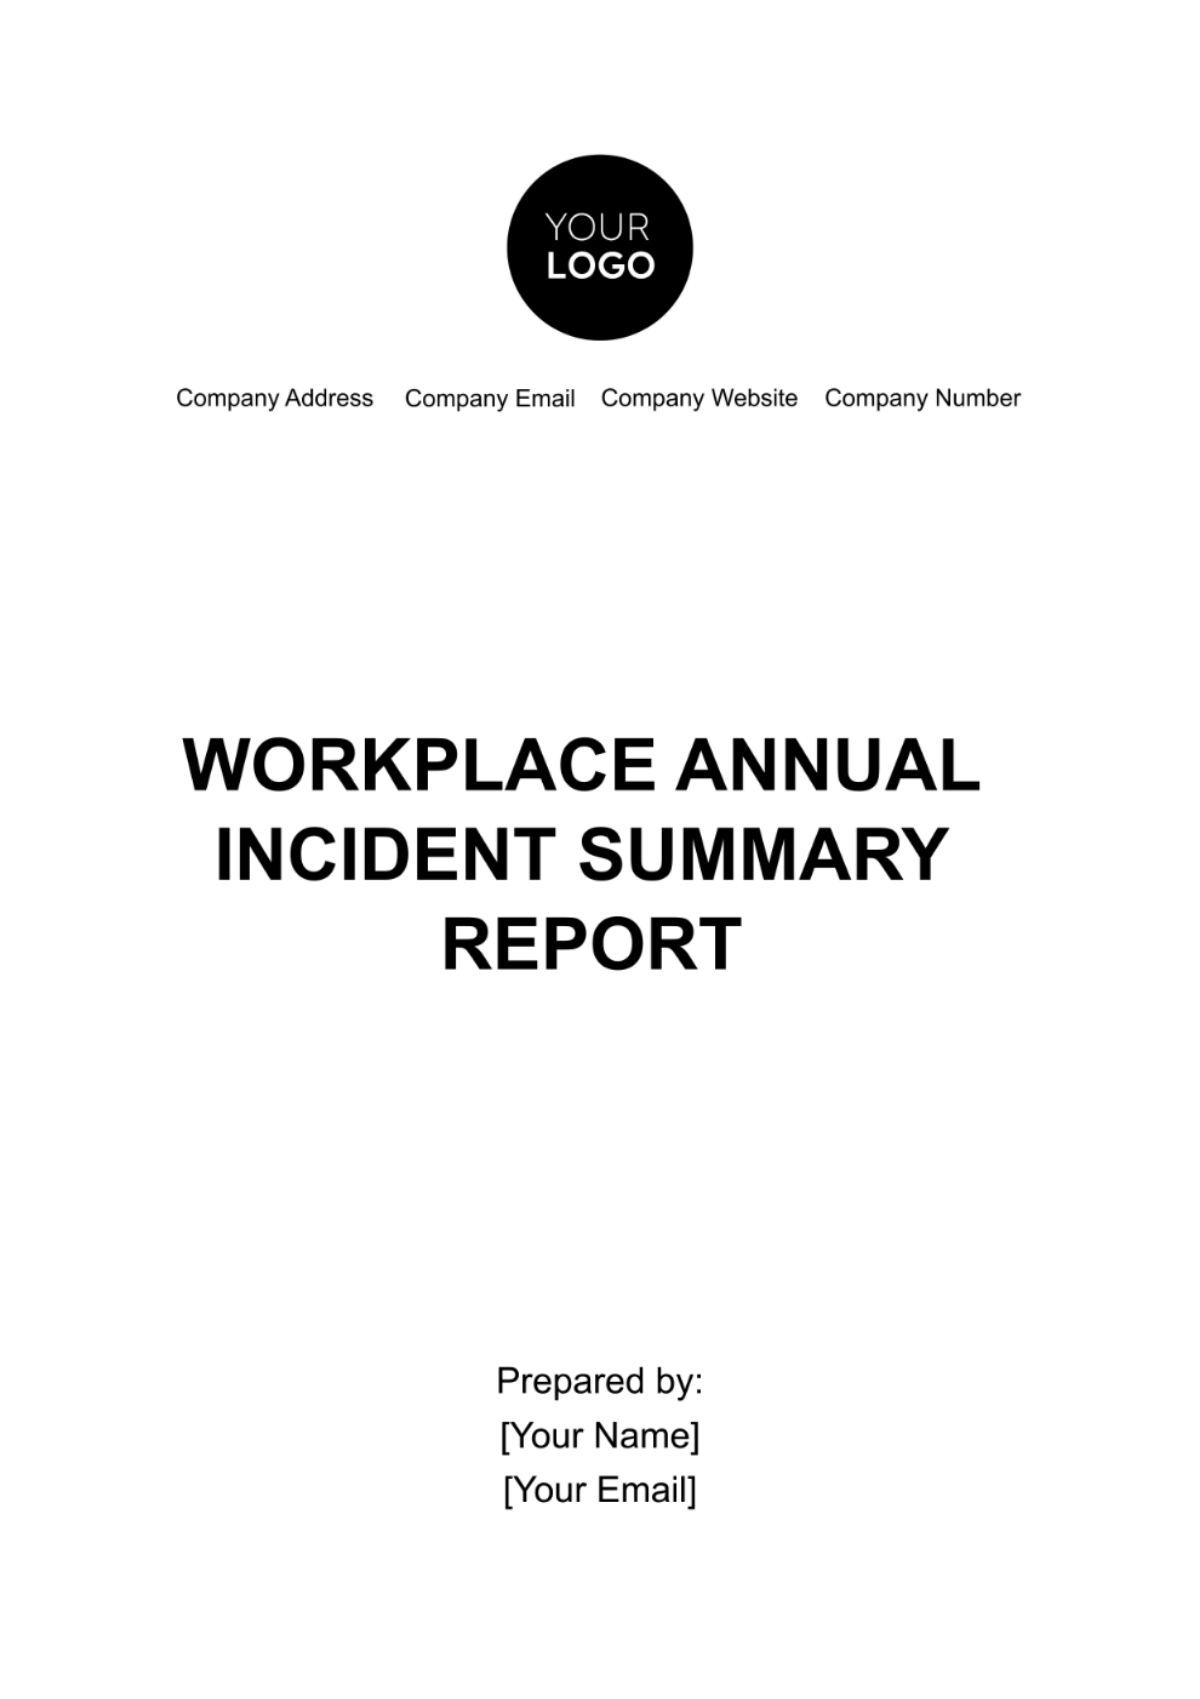 Free Workplace Annual Incident Summary Report Template